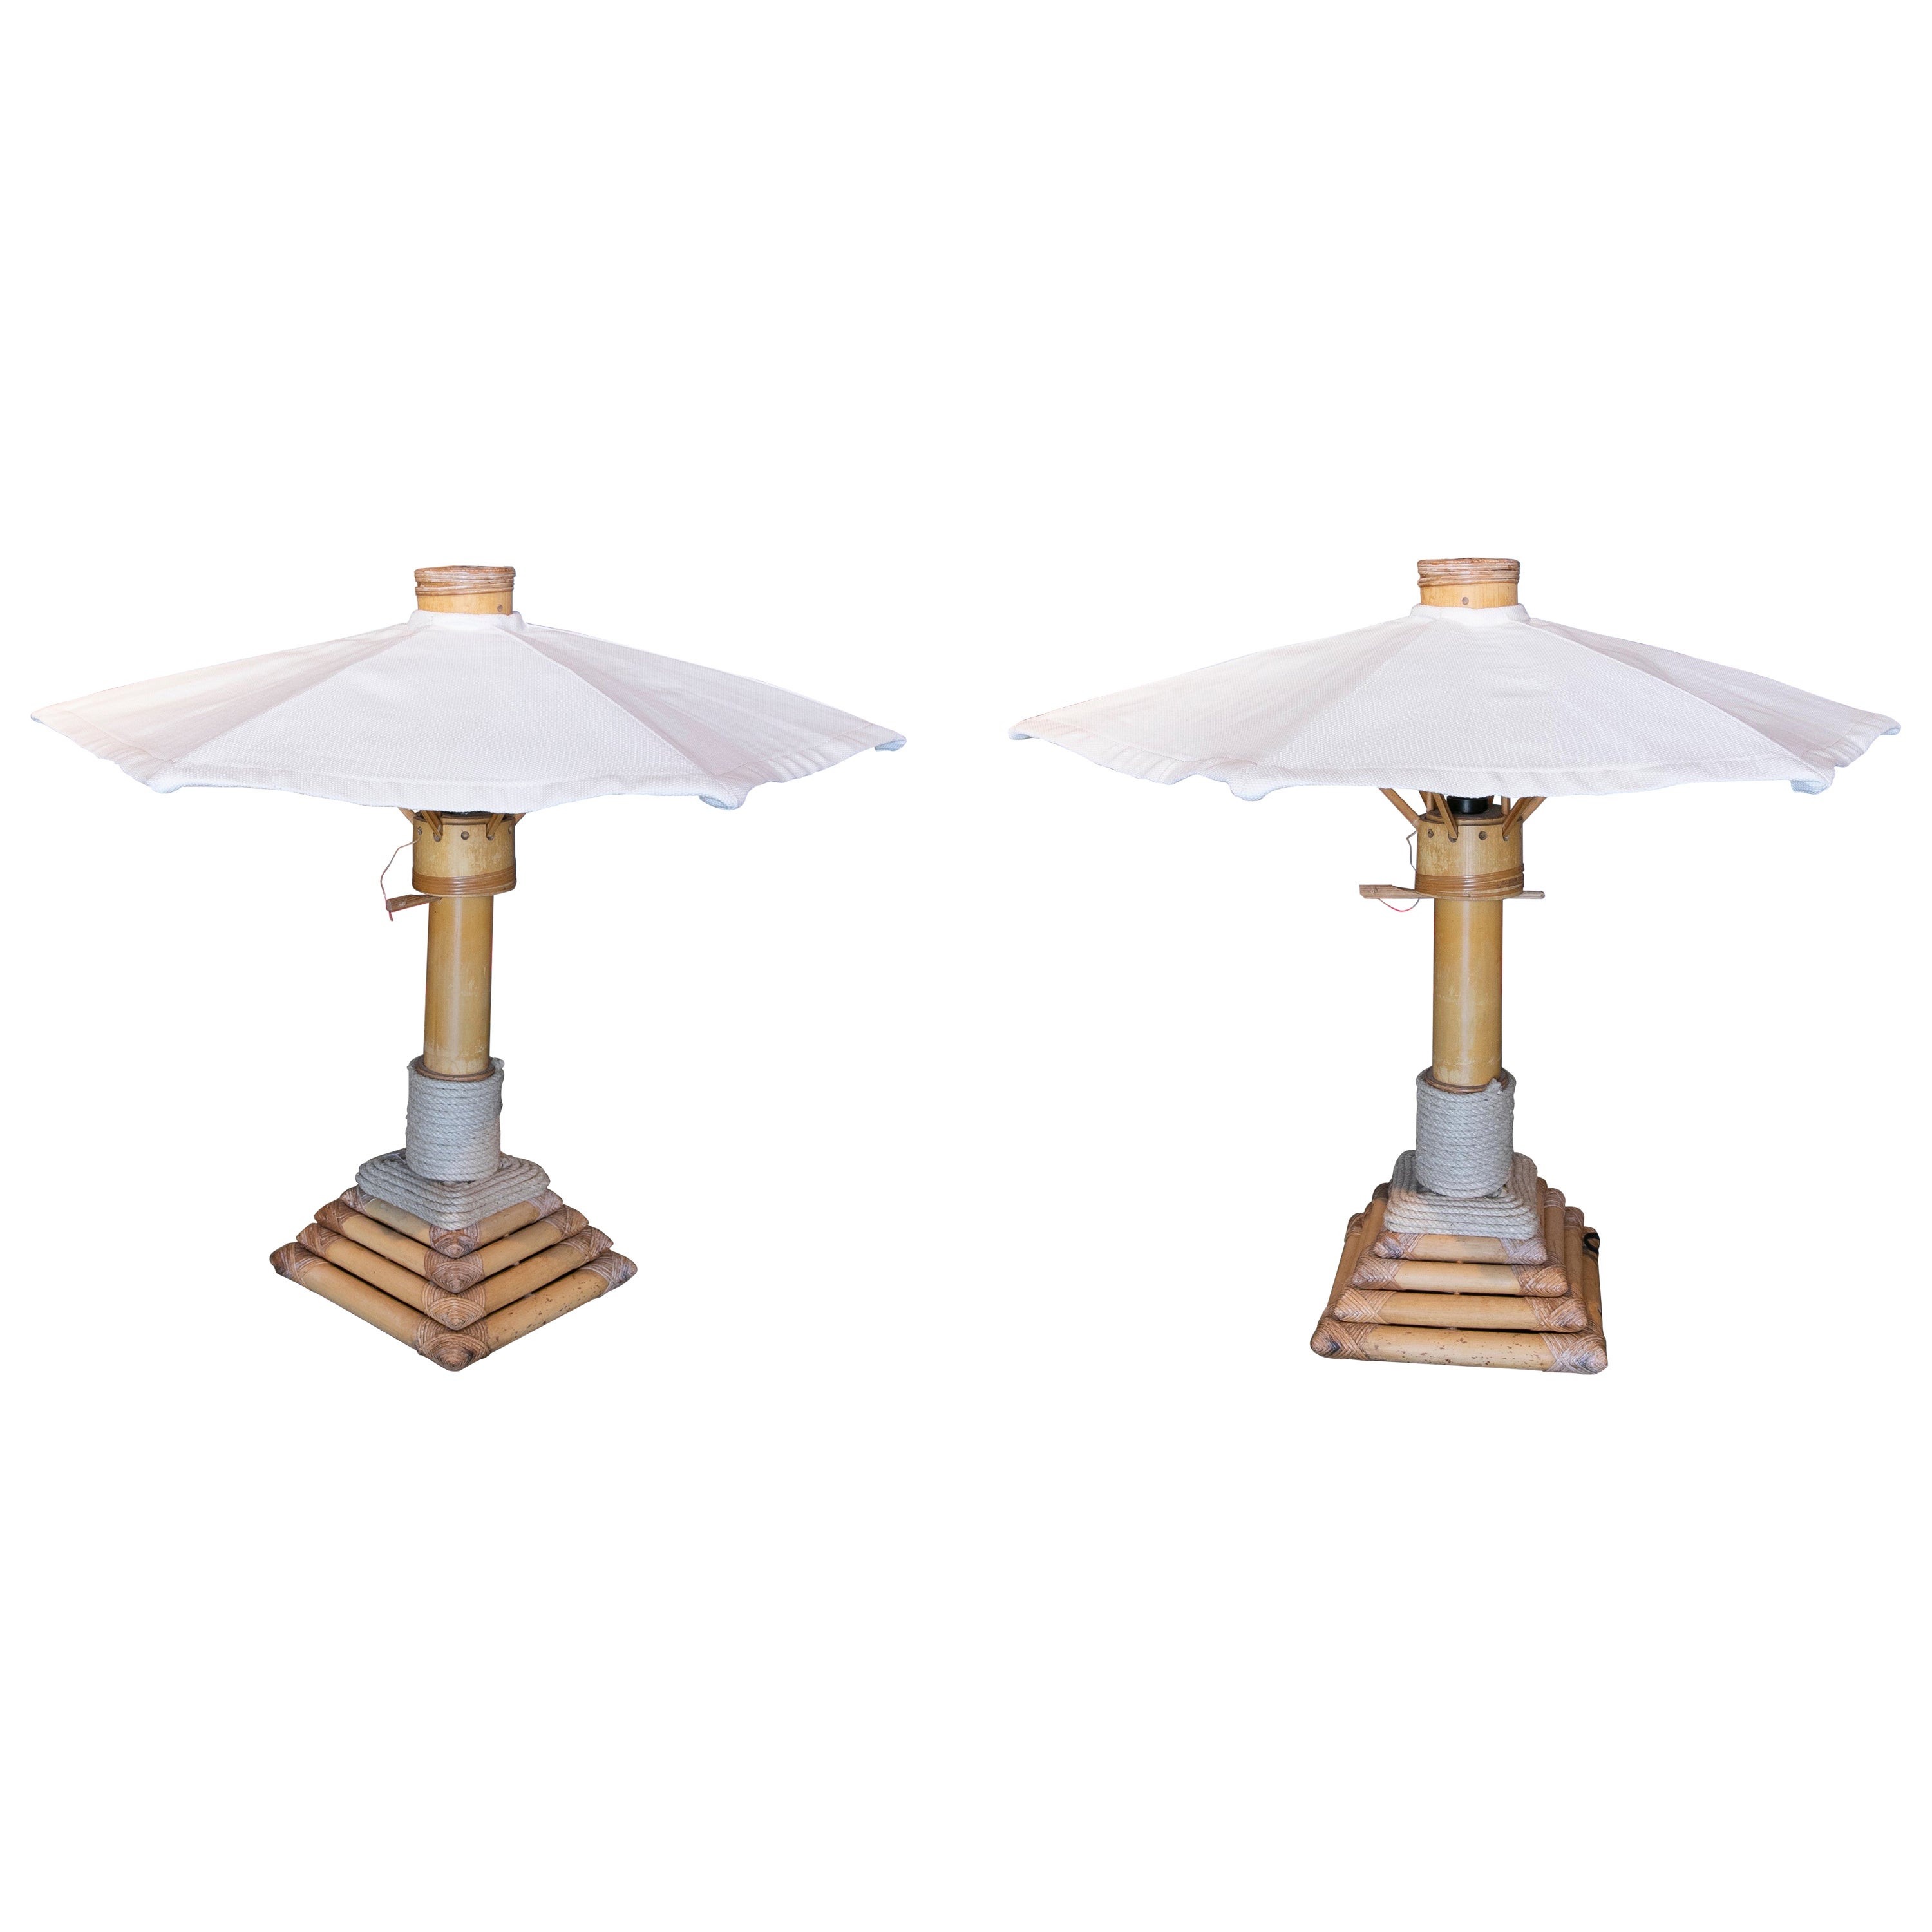 Pair of Bamboo Table Lamps with Garden Parasols Shape from the 1970ies